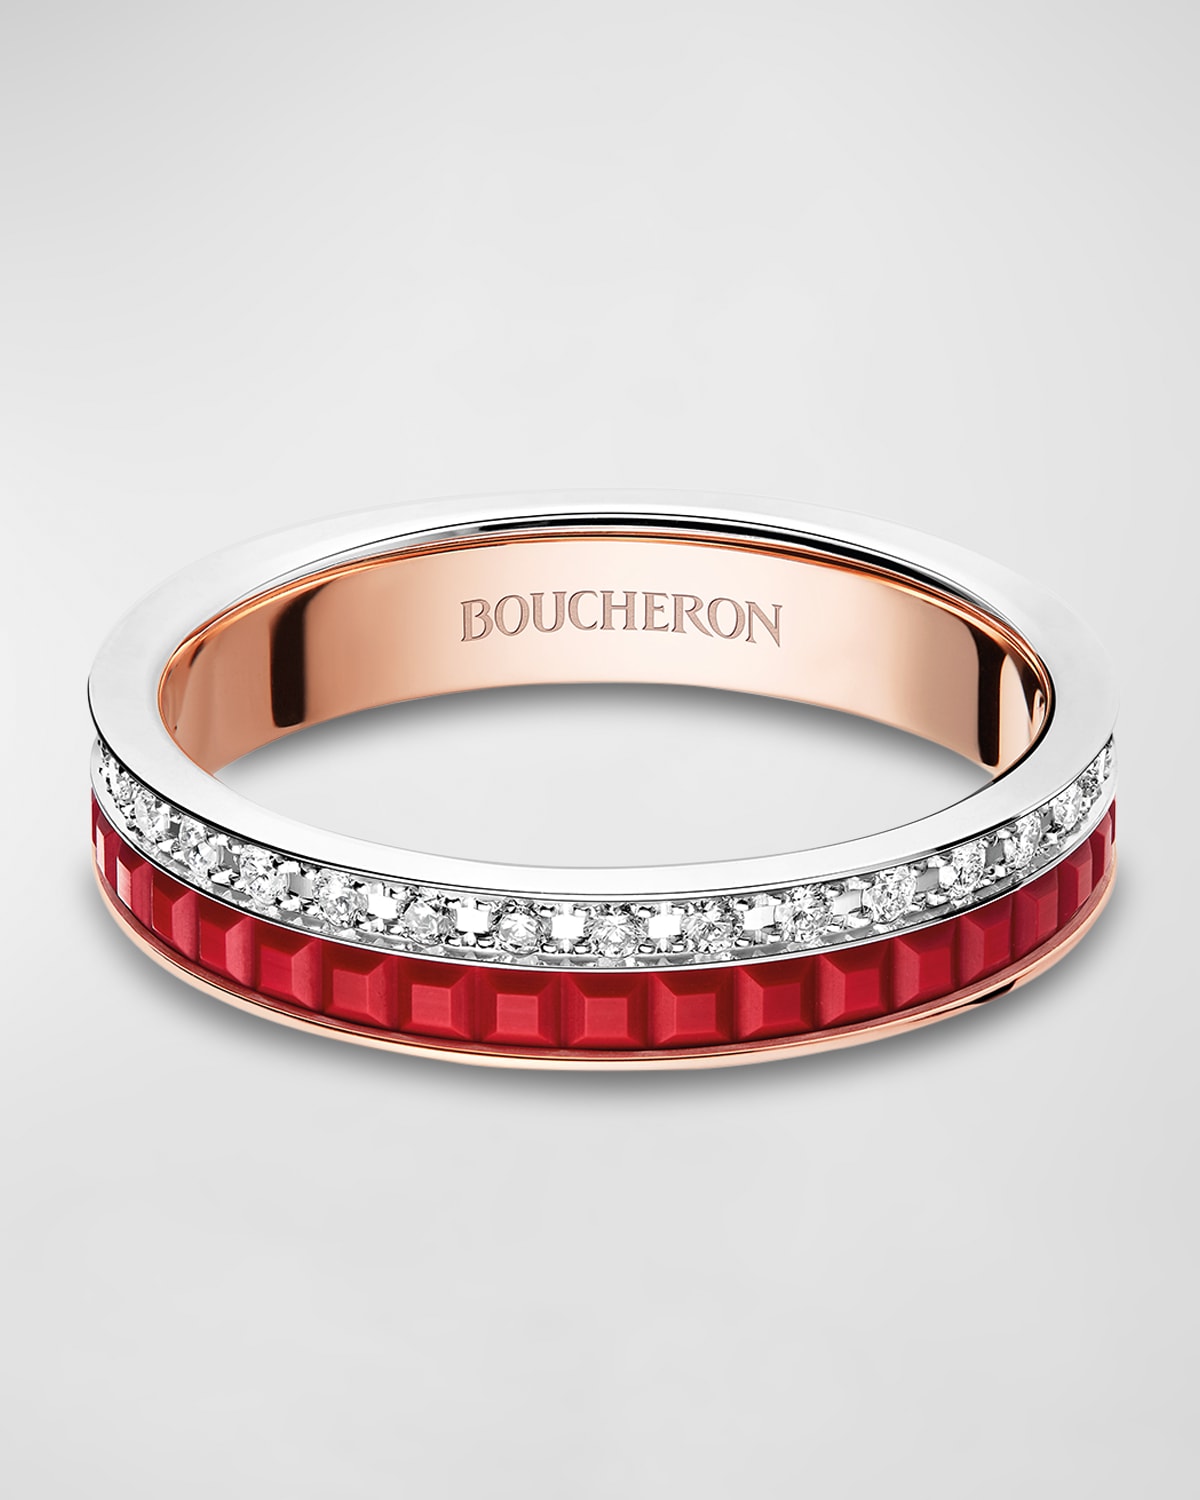 Boucheron Pink Gold and White Gold Quatre Red Edition Diamond Ring, Size 52